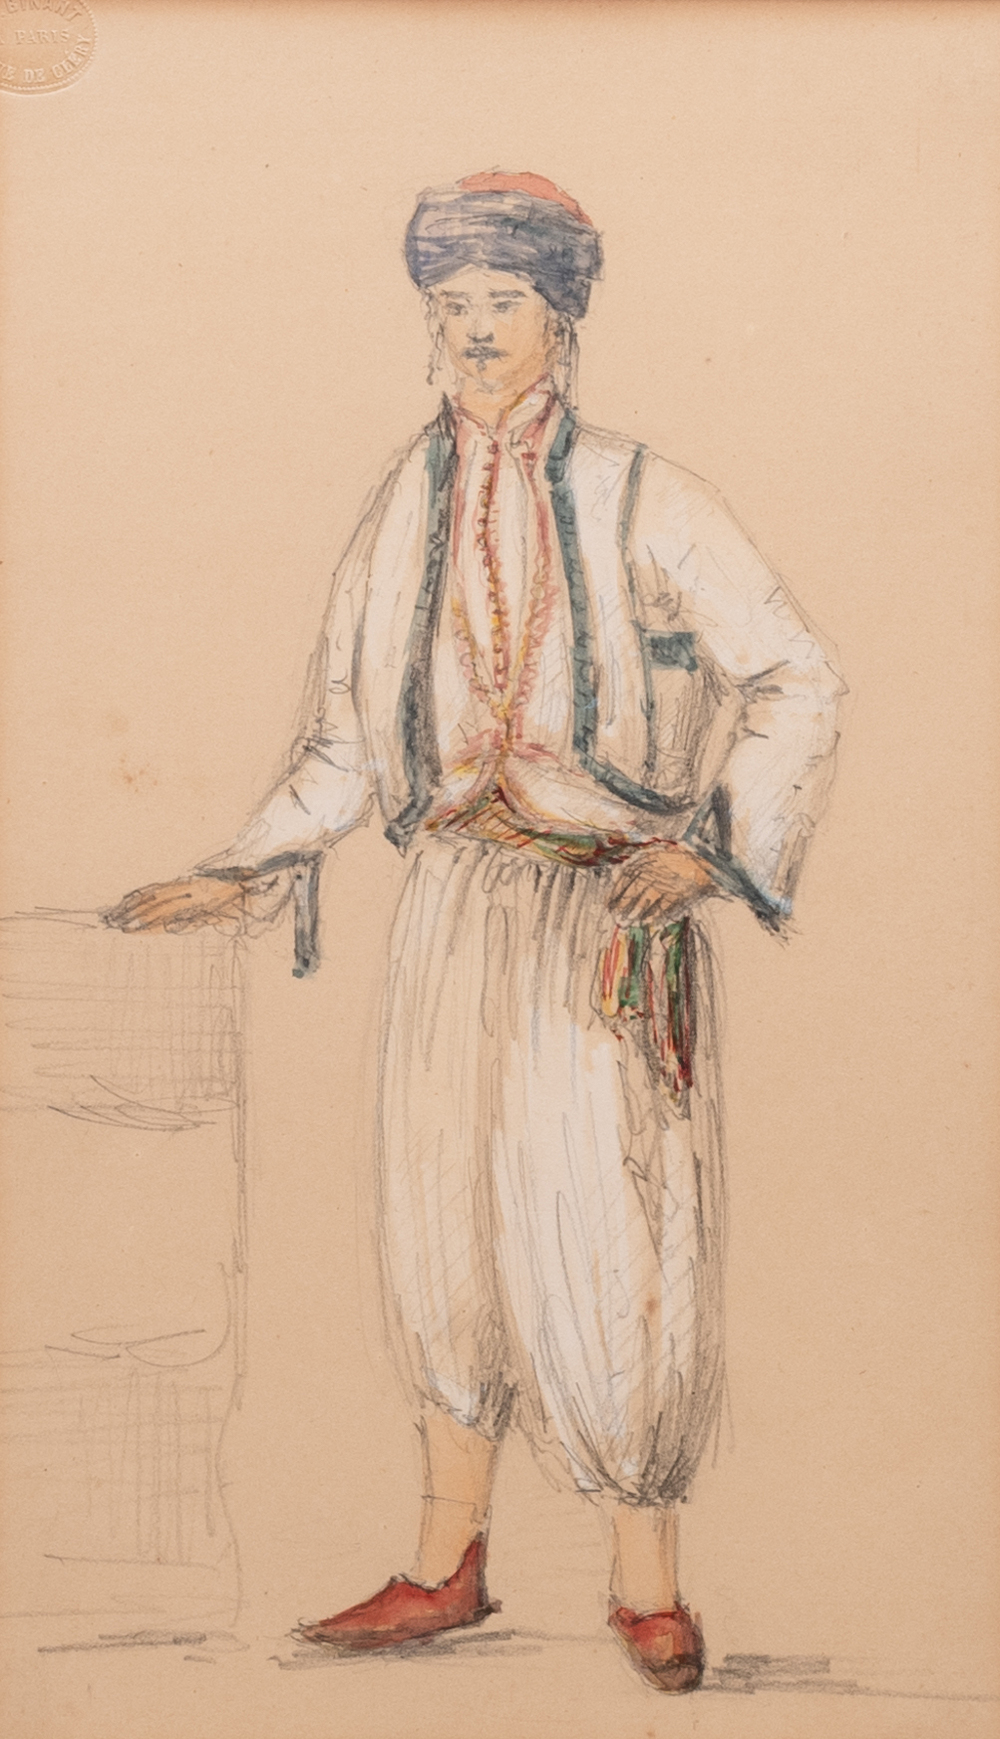 French school: A Turkish or Ottoman boy, pencil and watercolour on paper, 19th C.